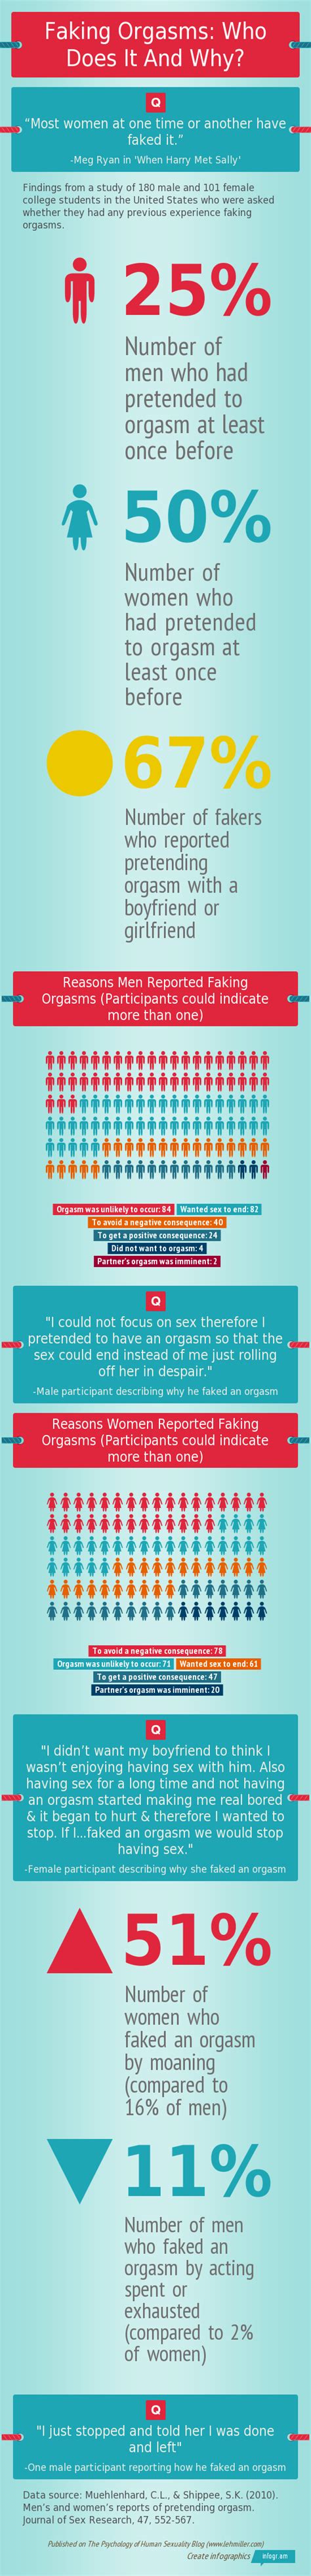 faking orgasms who does it and why infographic — sex and psychology